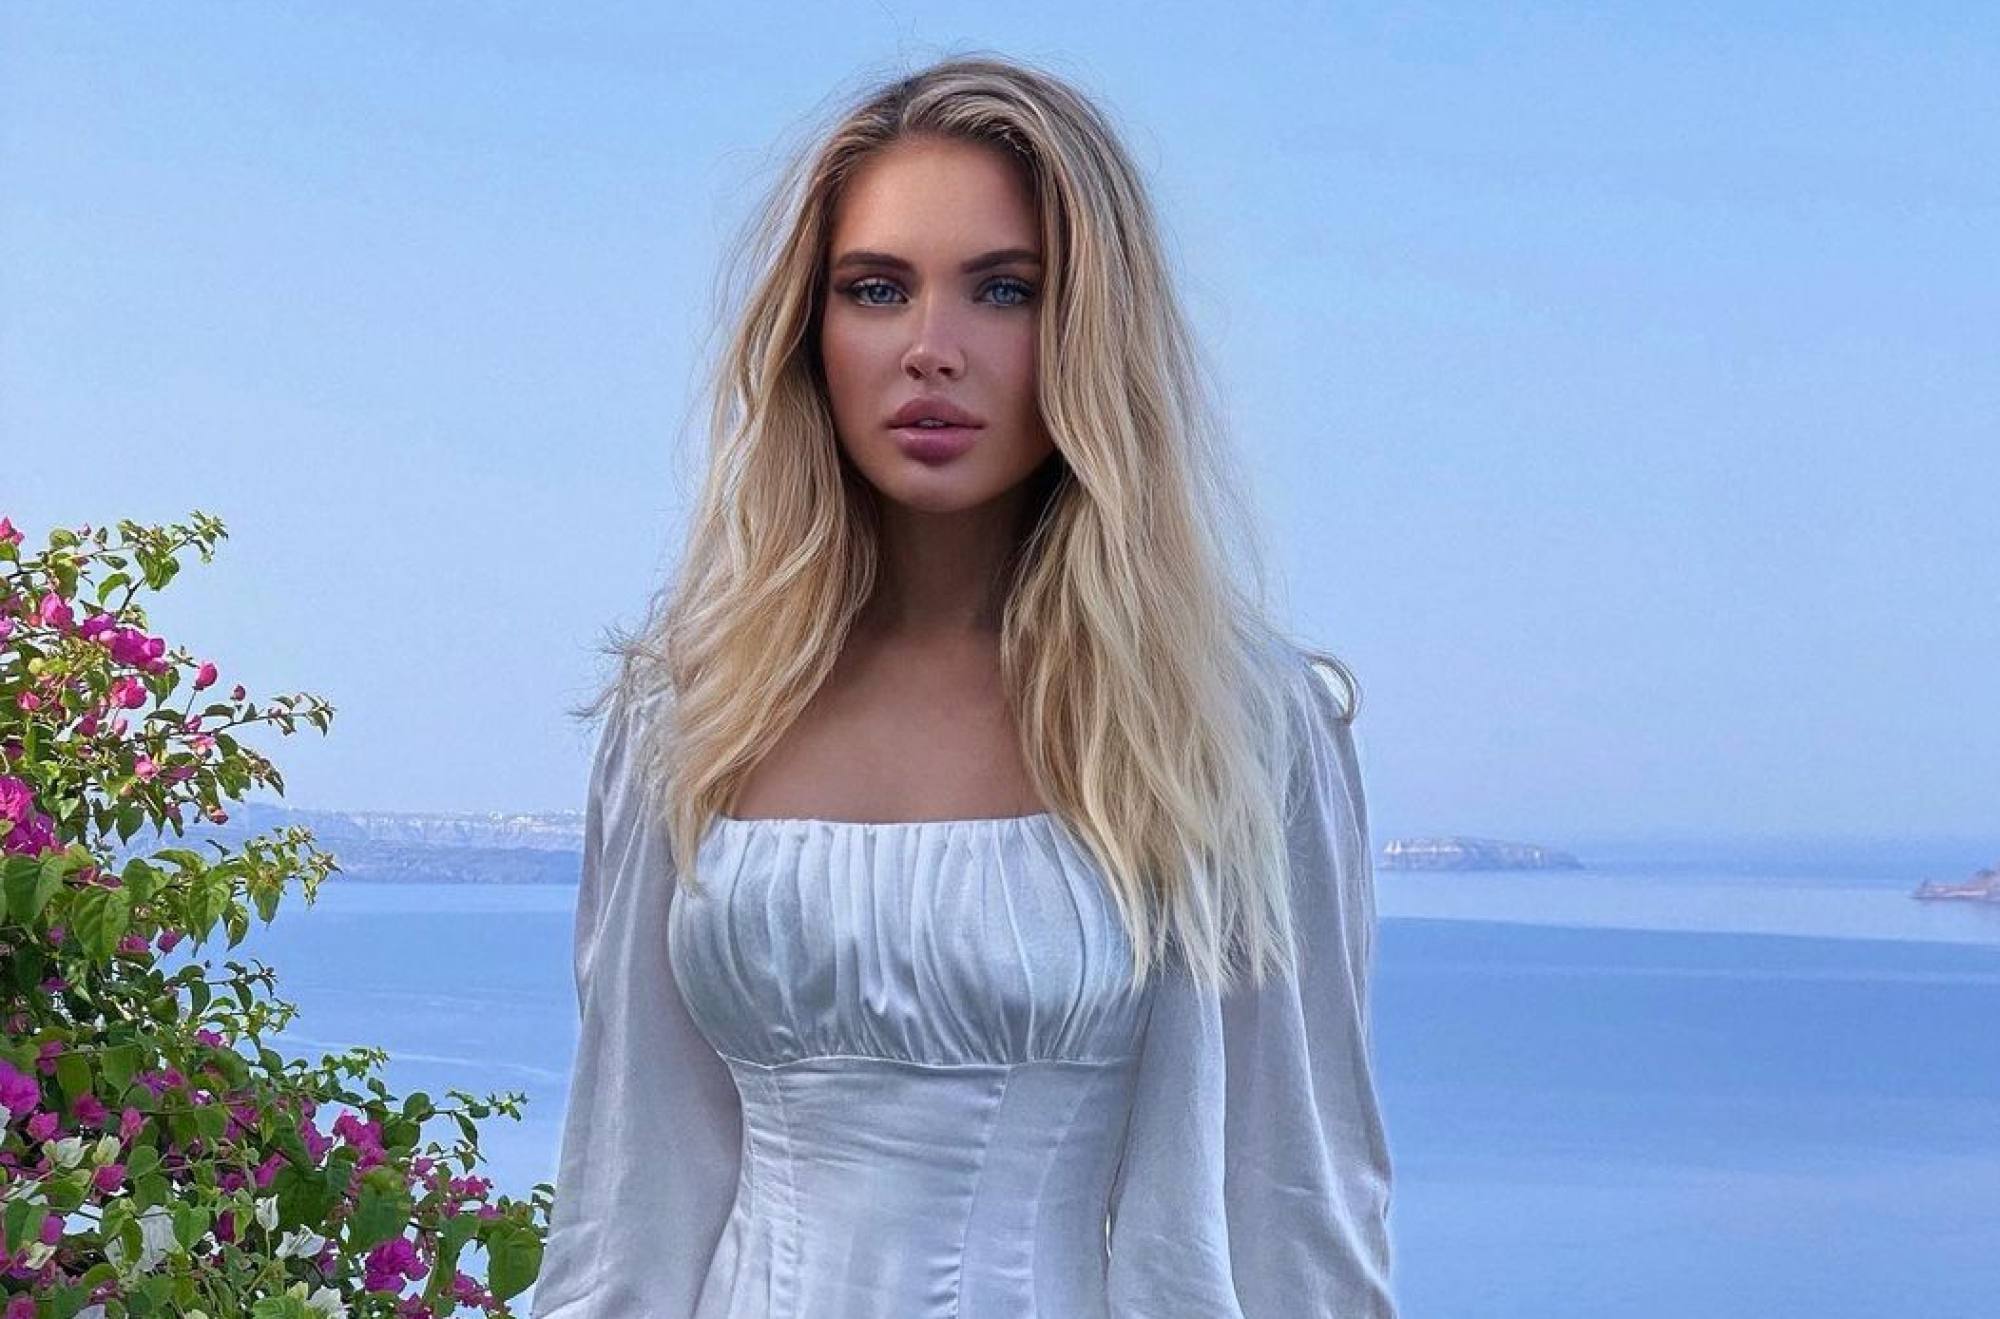 ‘insensitive’ Ukraine Beauty Queen Slams Pageant For Making Her Share